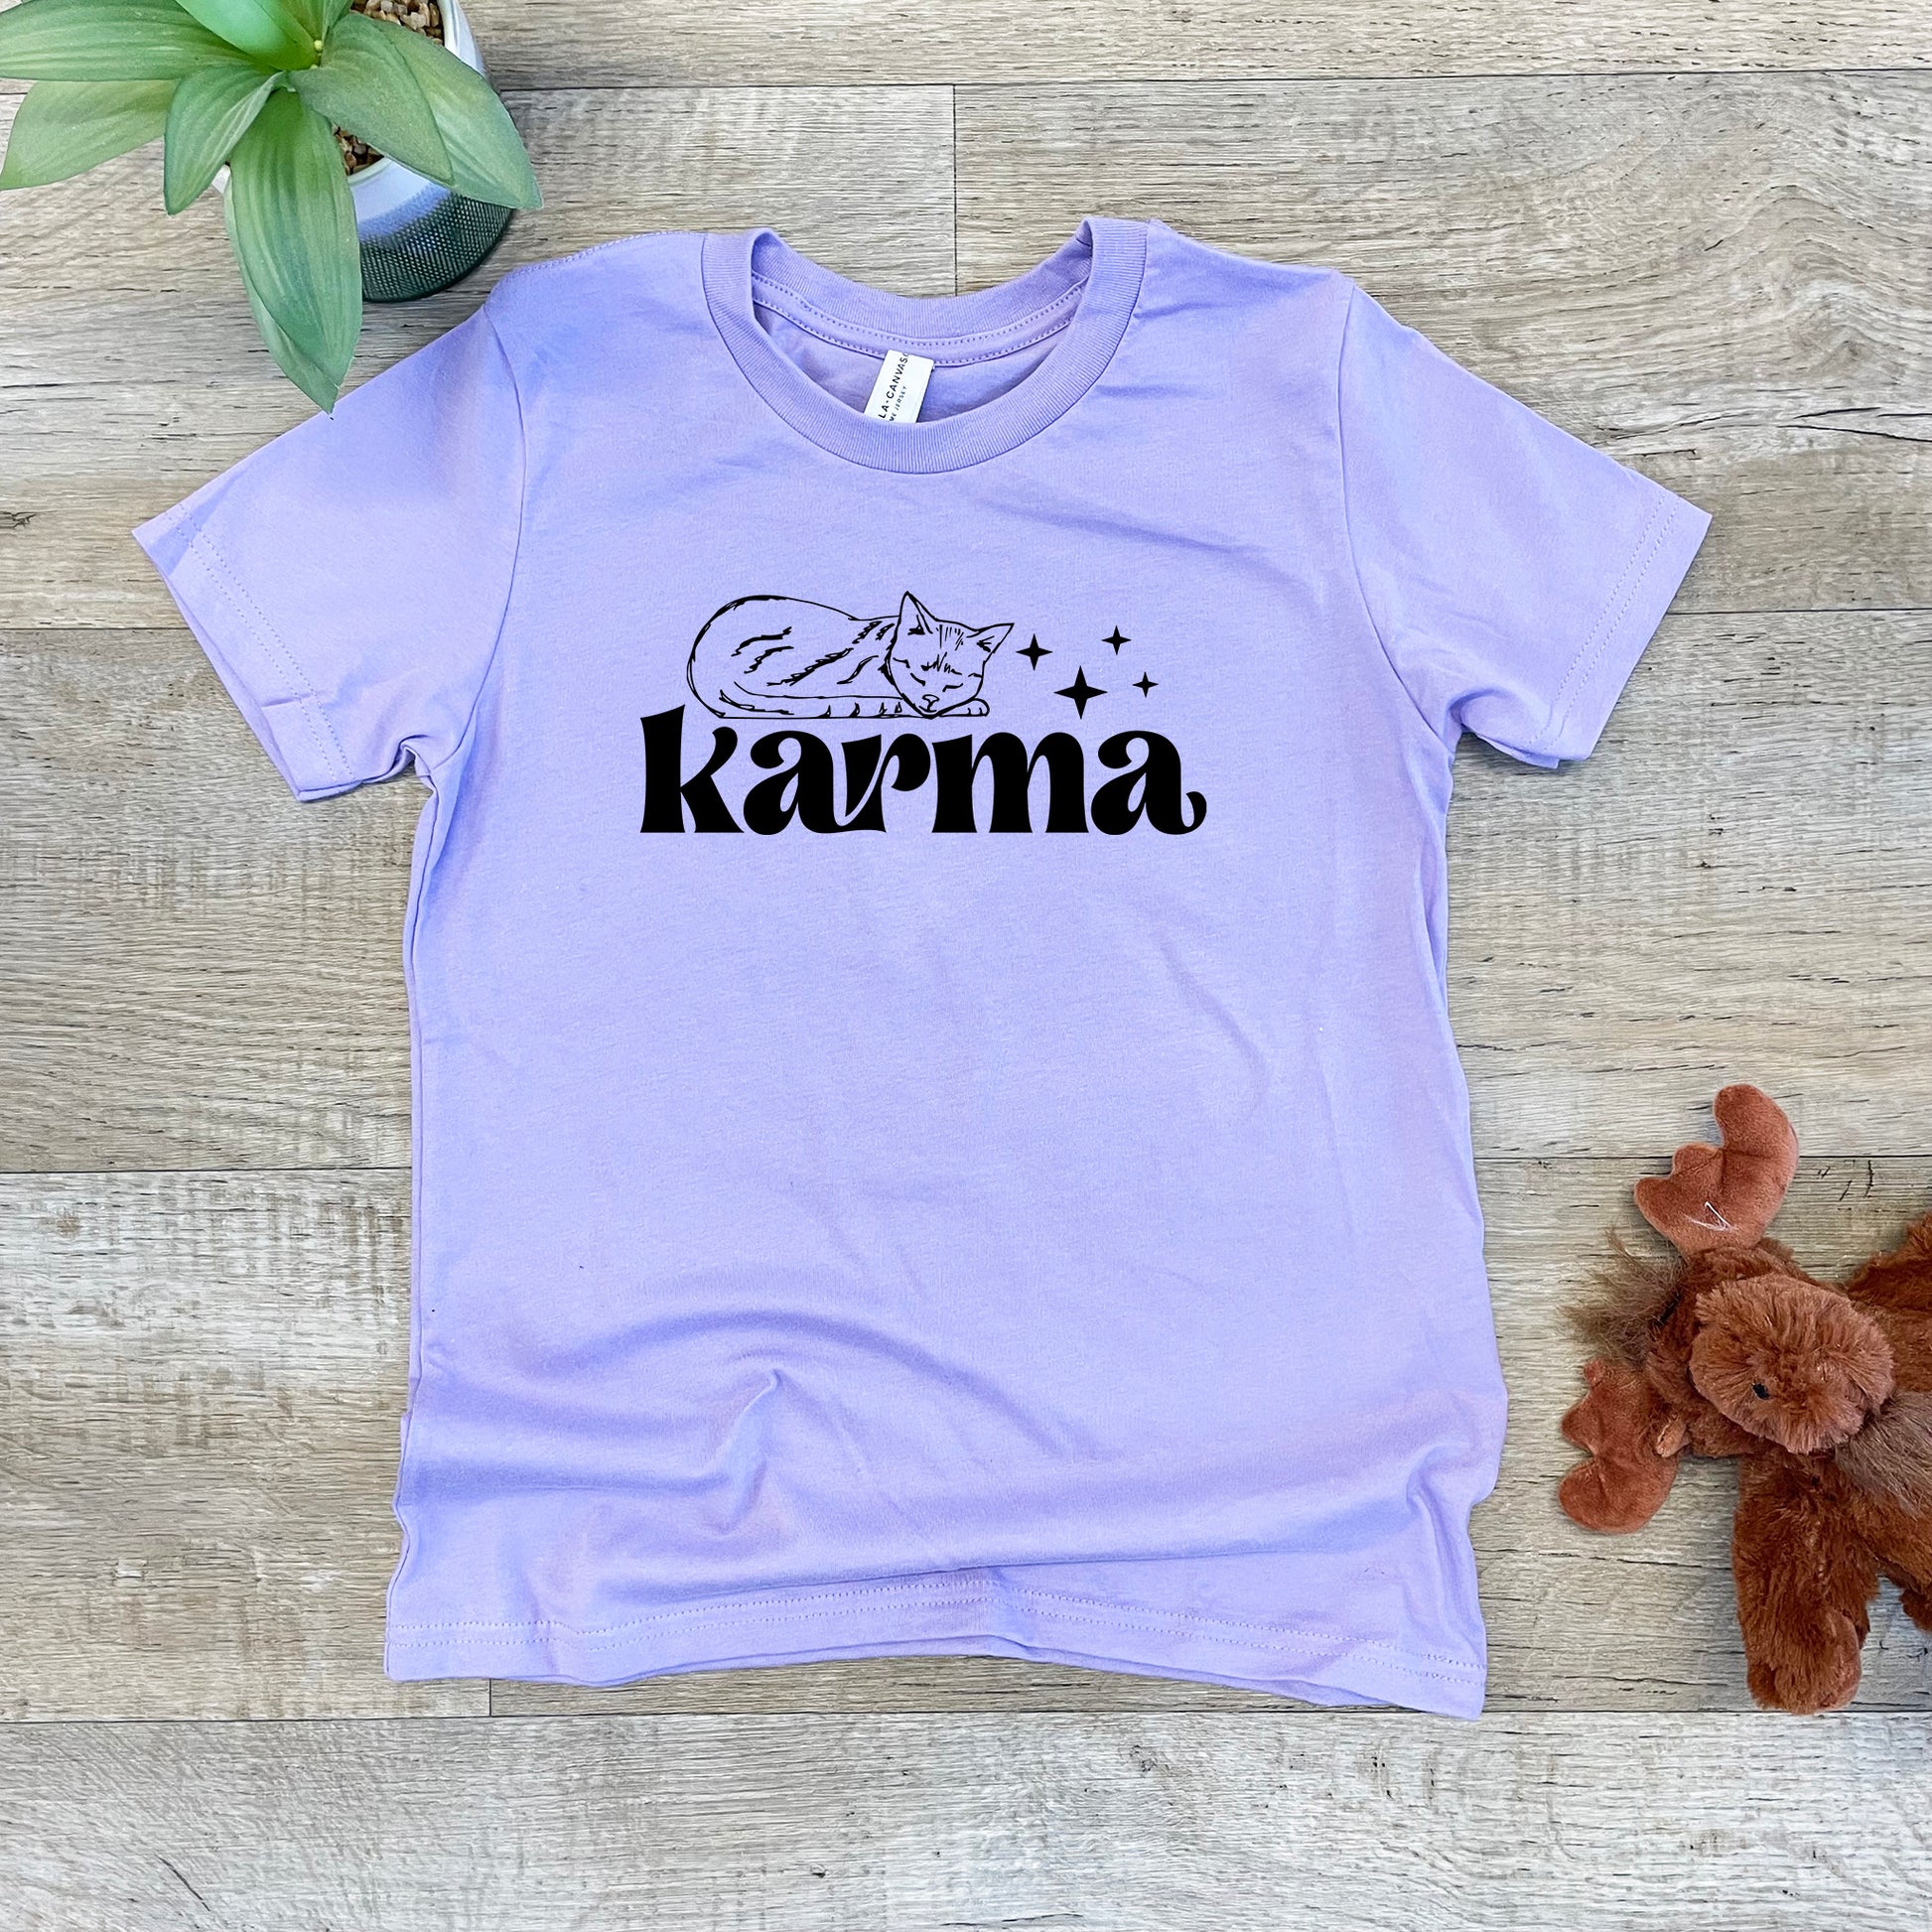 a purple shirt with the word karmia on it next to a teddy bear